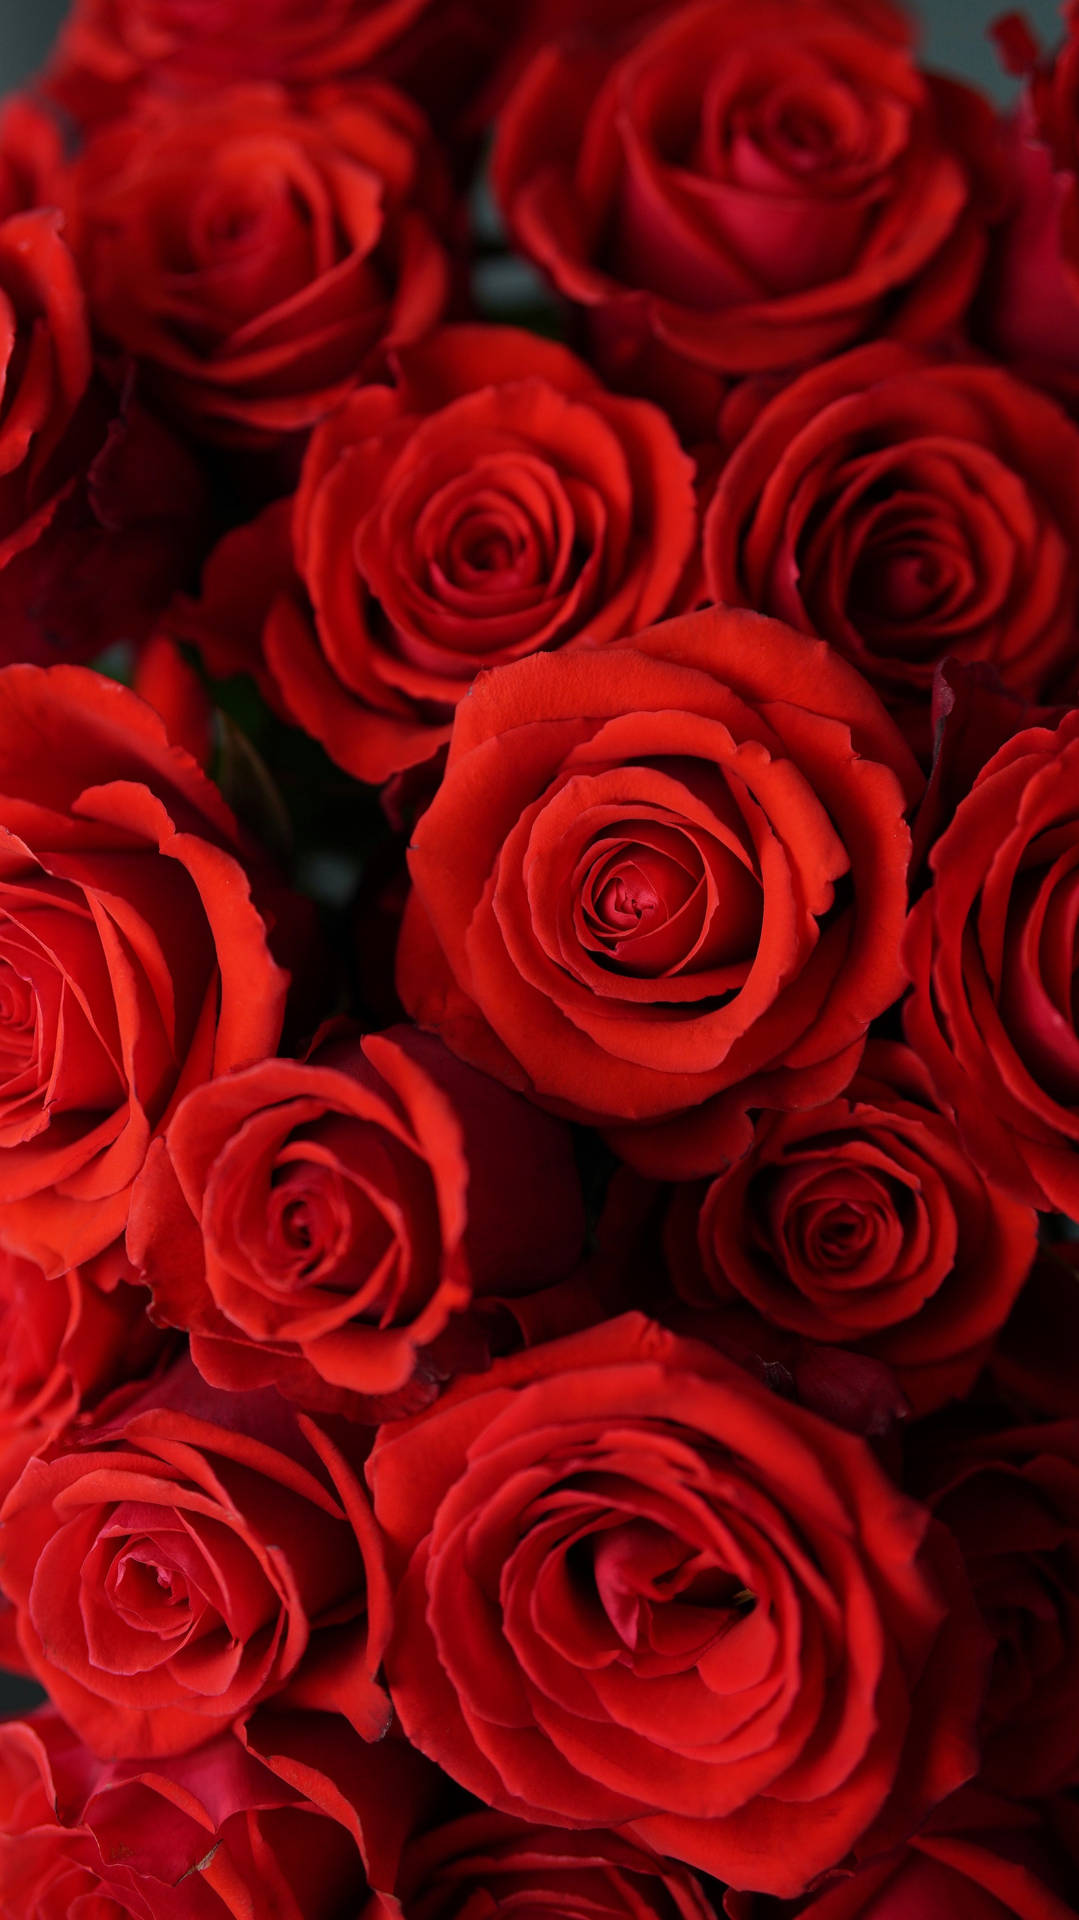 Close-up Red Rose Aesthetic Wallpaper